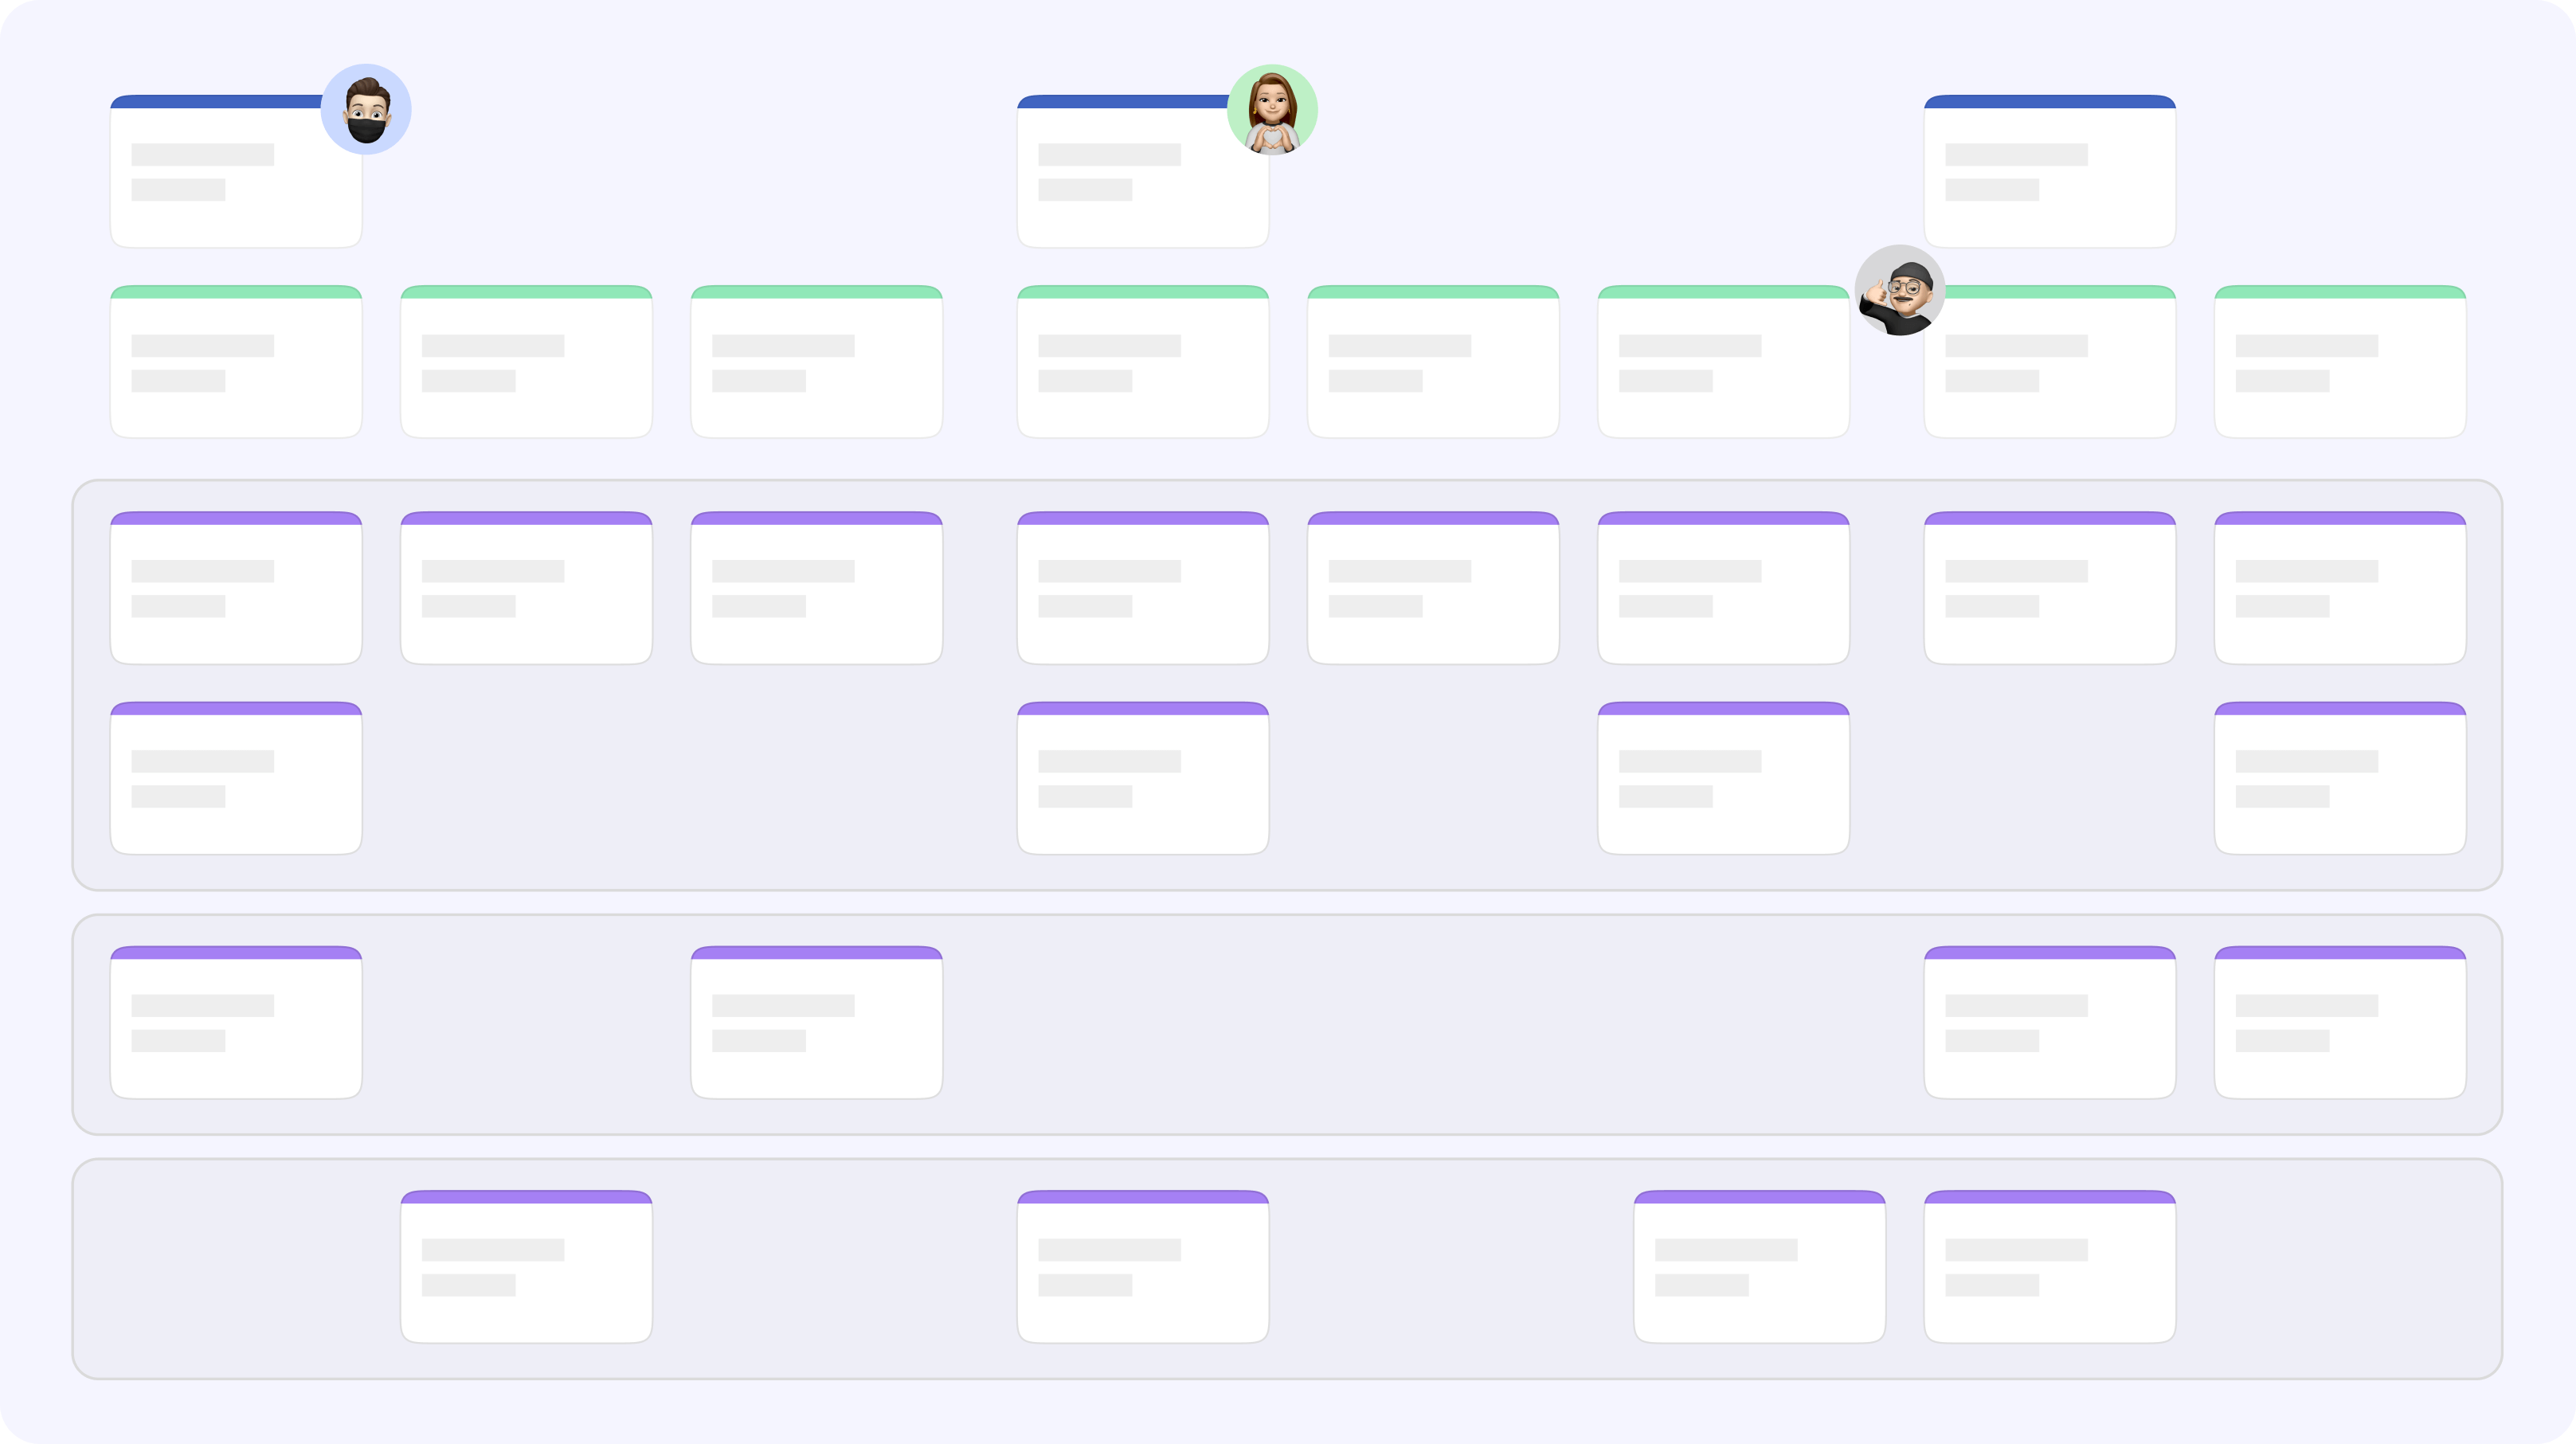 An image of a simple user story map